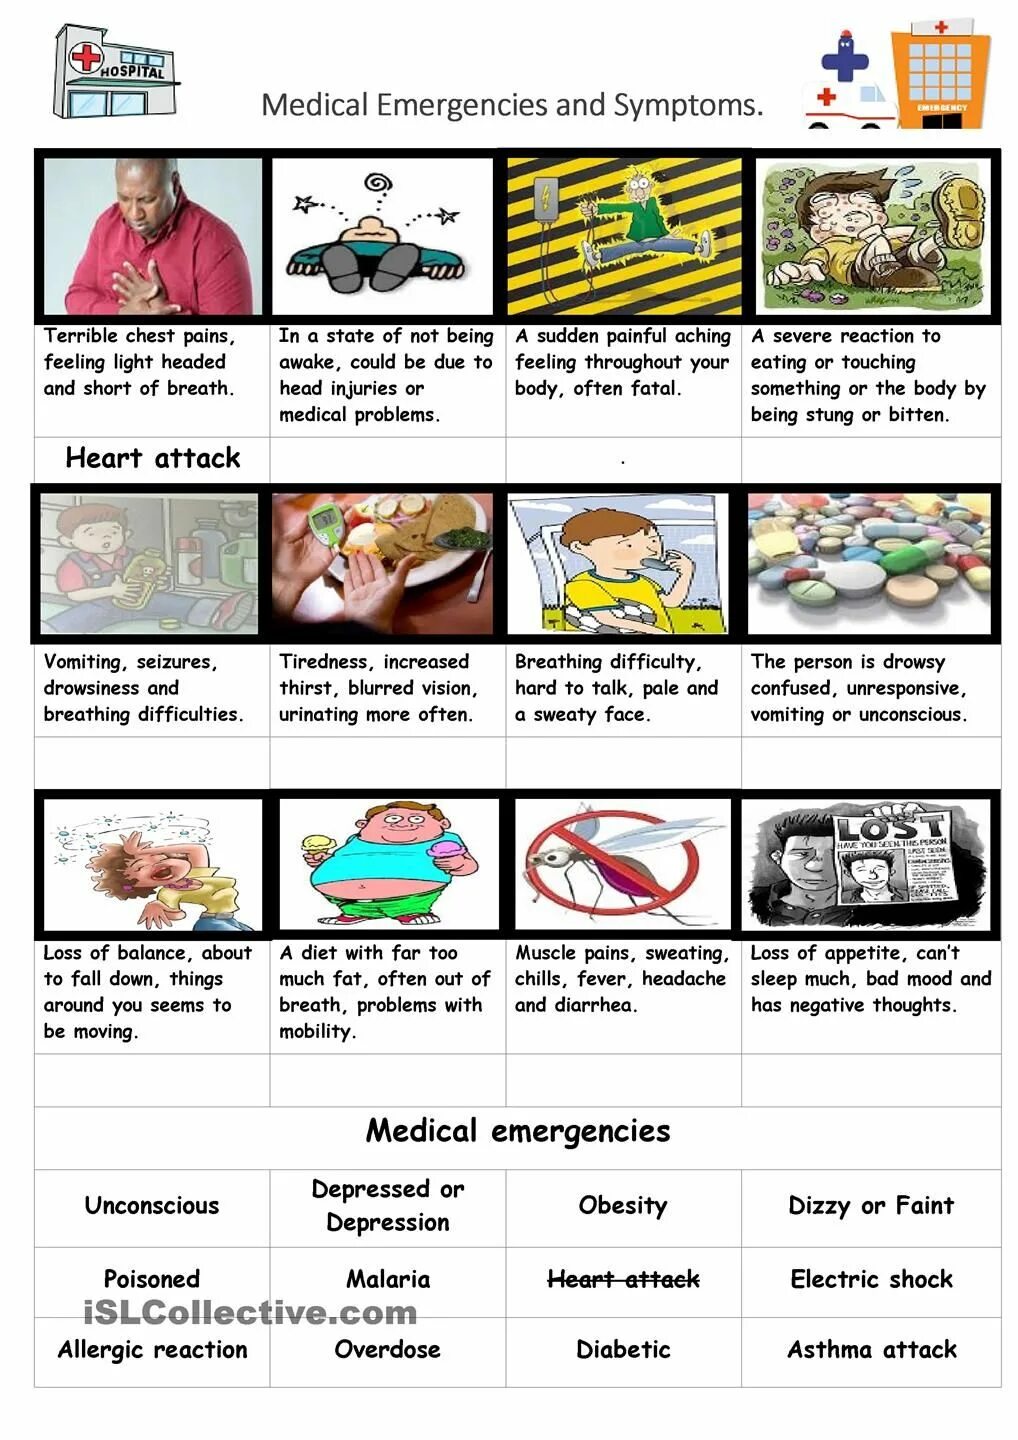 Https en islcollective com. Emergency services Vocabulary. Emergency Worksheet. Injuries вокабуляр. Emergency services Worksheets.